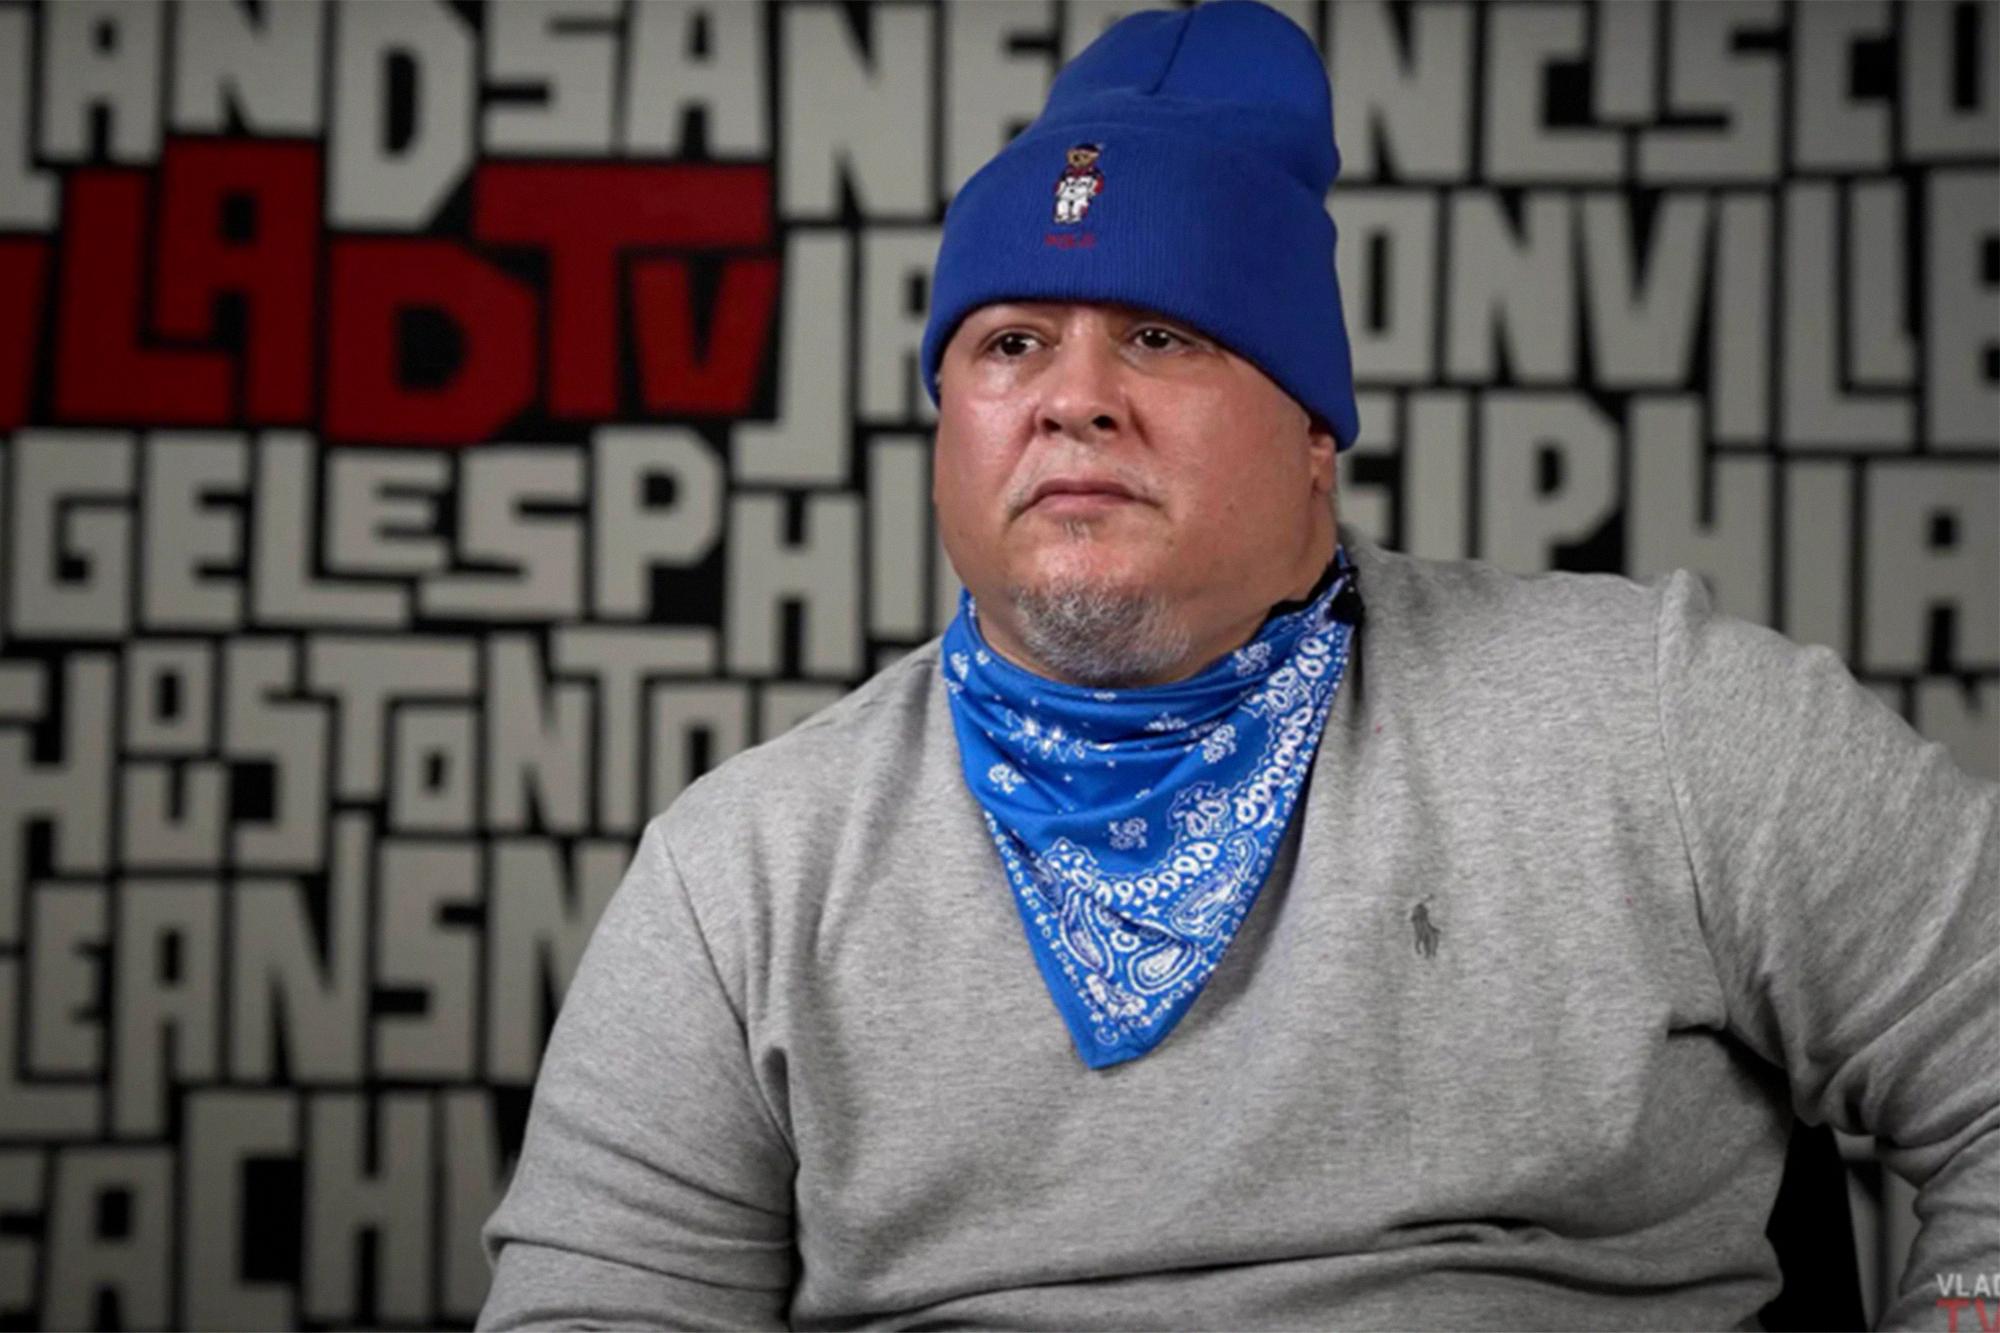 founder of crips